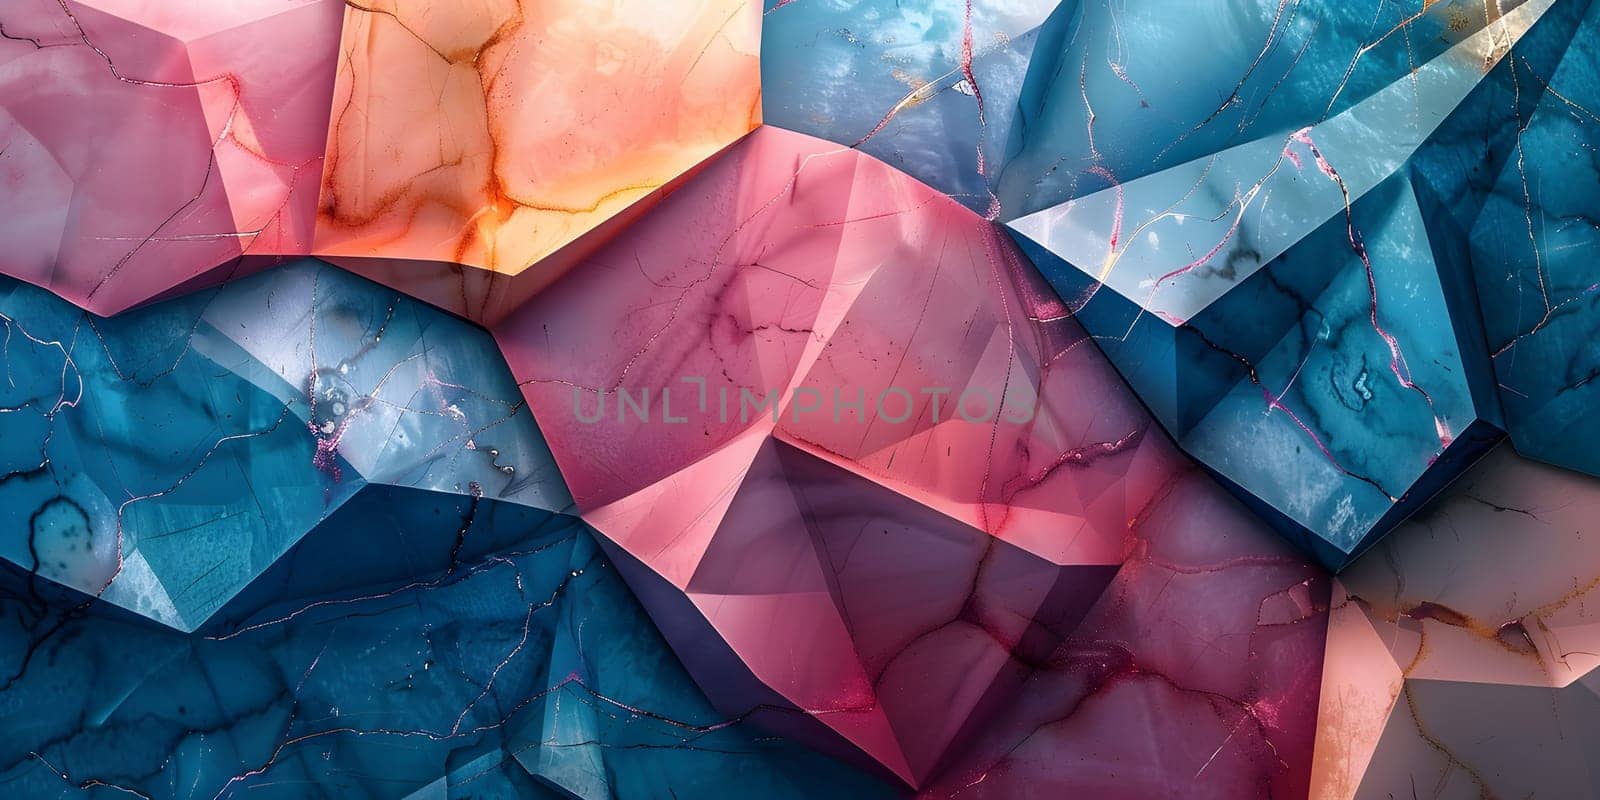 A closeup of a vibrant geometric pattern featuring triangles in electric blue and magenta shades. The symmetrical design creates a striking visual art display on the wall